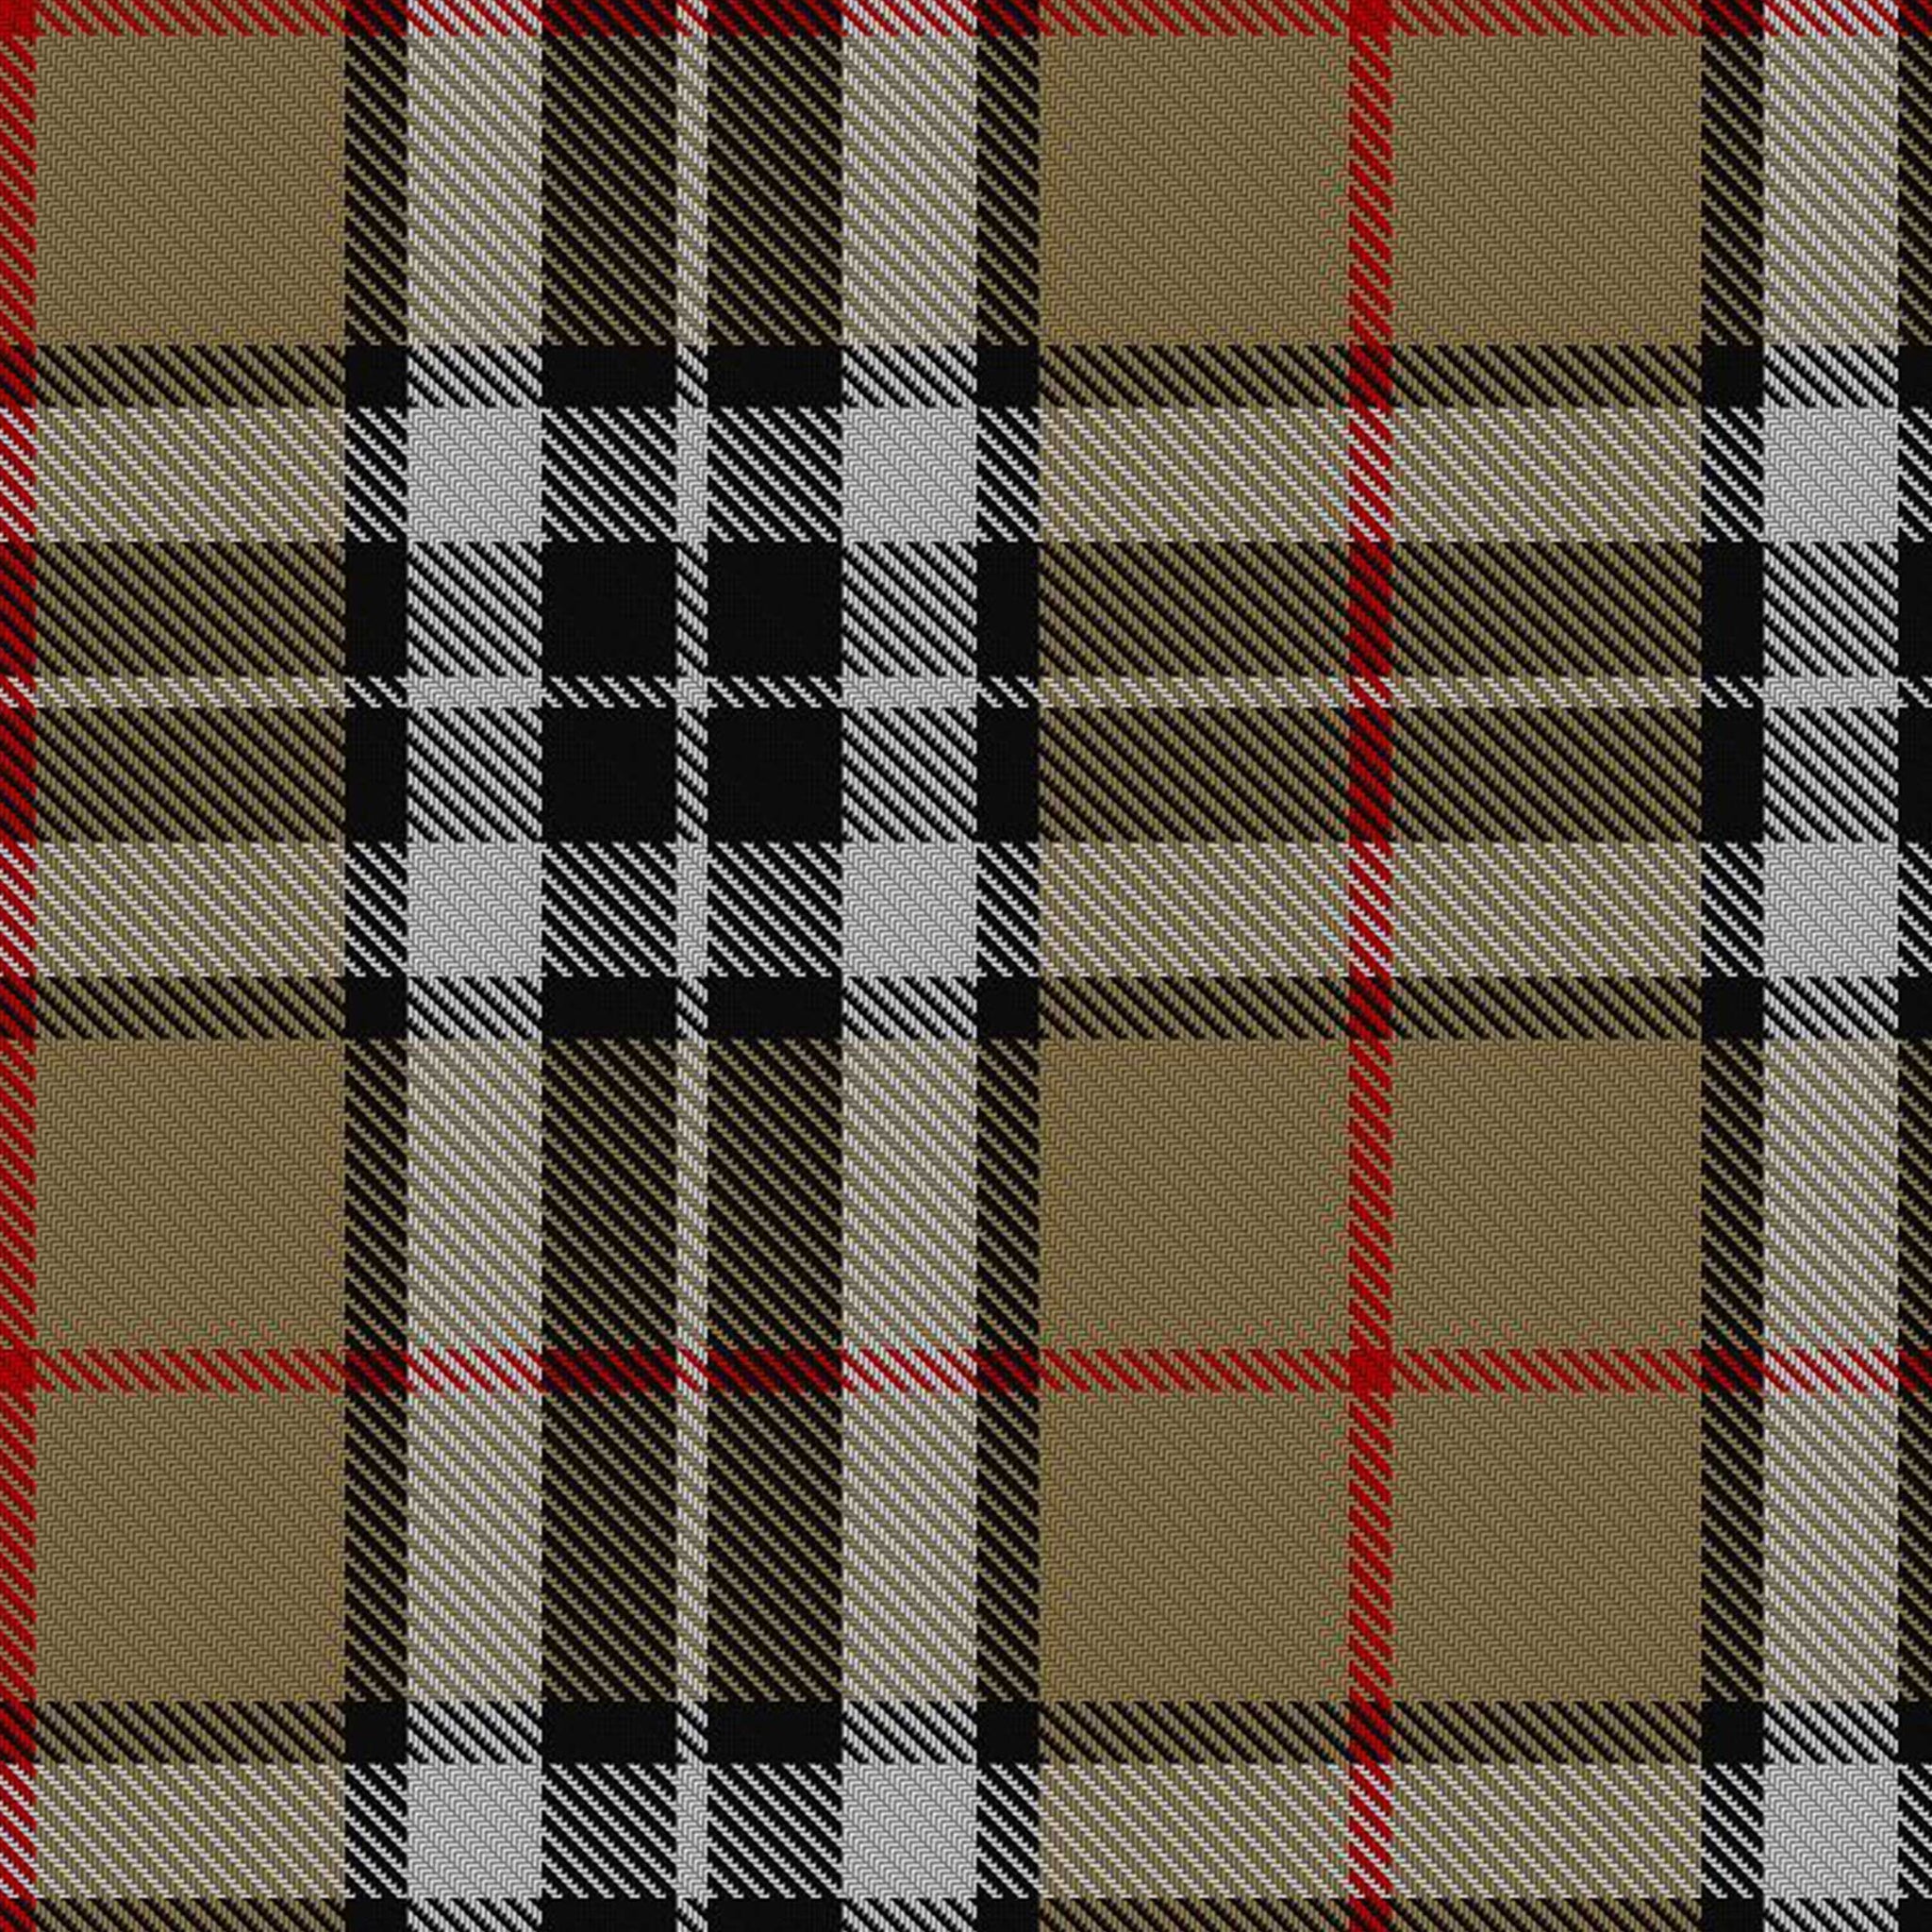 Camel Thomson Tartan Fabric and Accessories - Highland Redstone